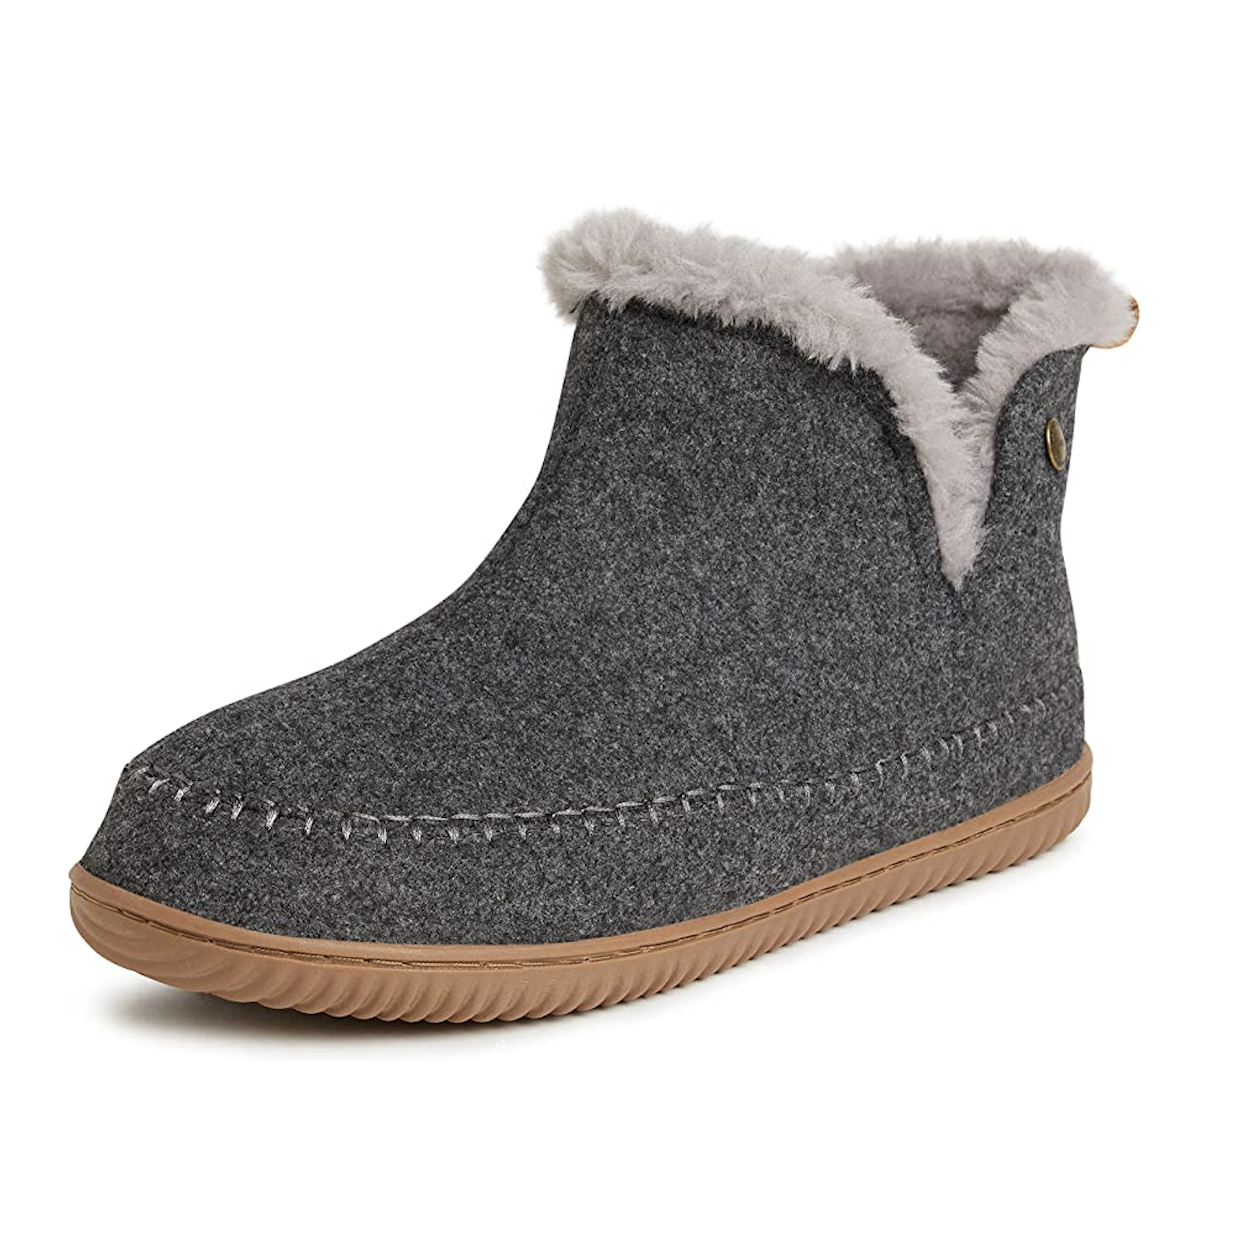 Men's Sheepskin Slippers | Quality NZ Product | The Tin Shed